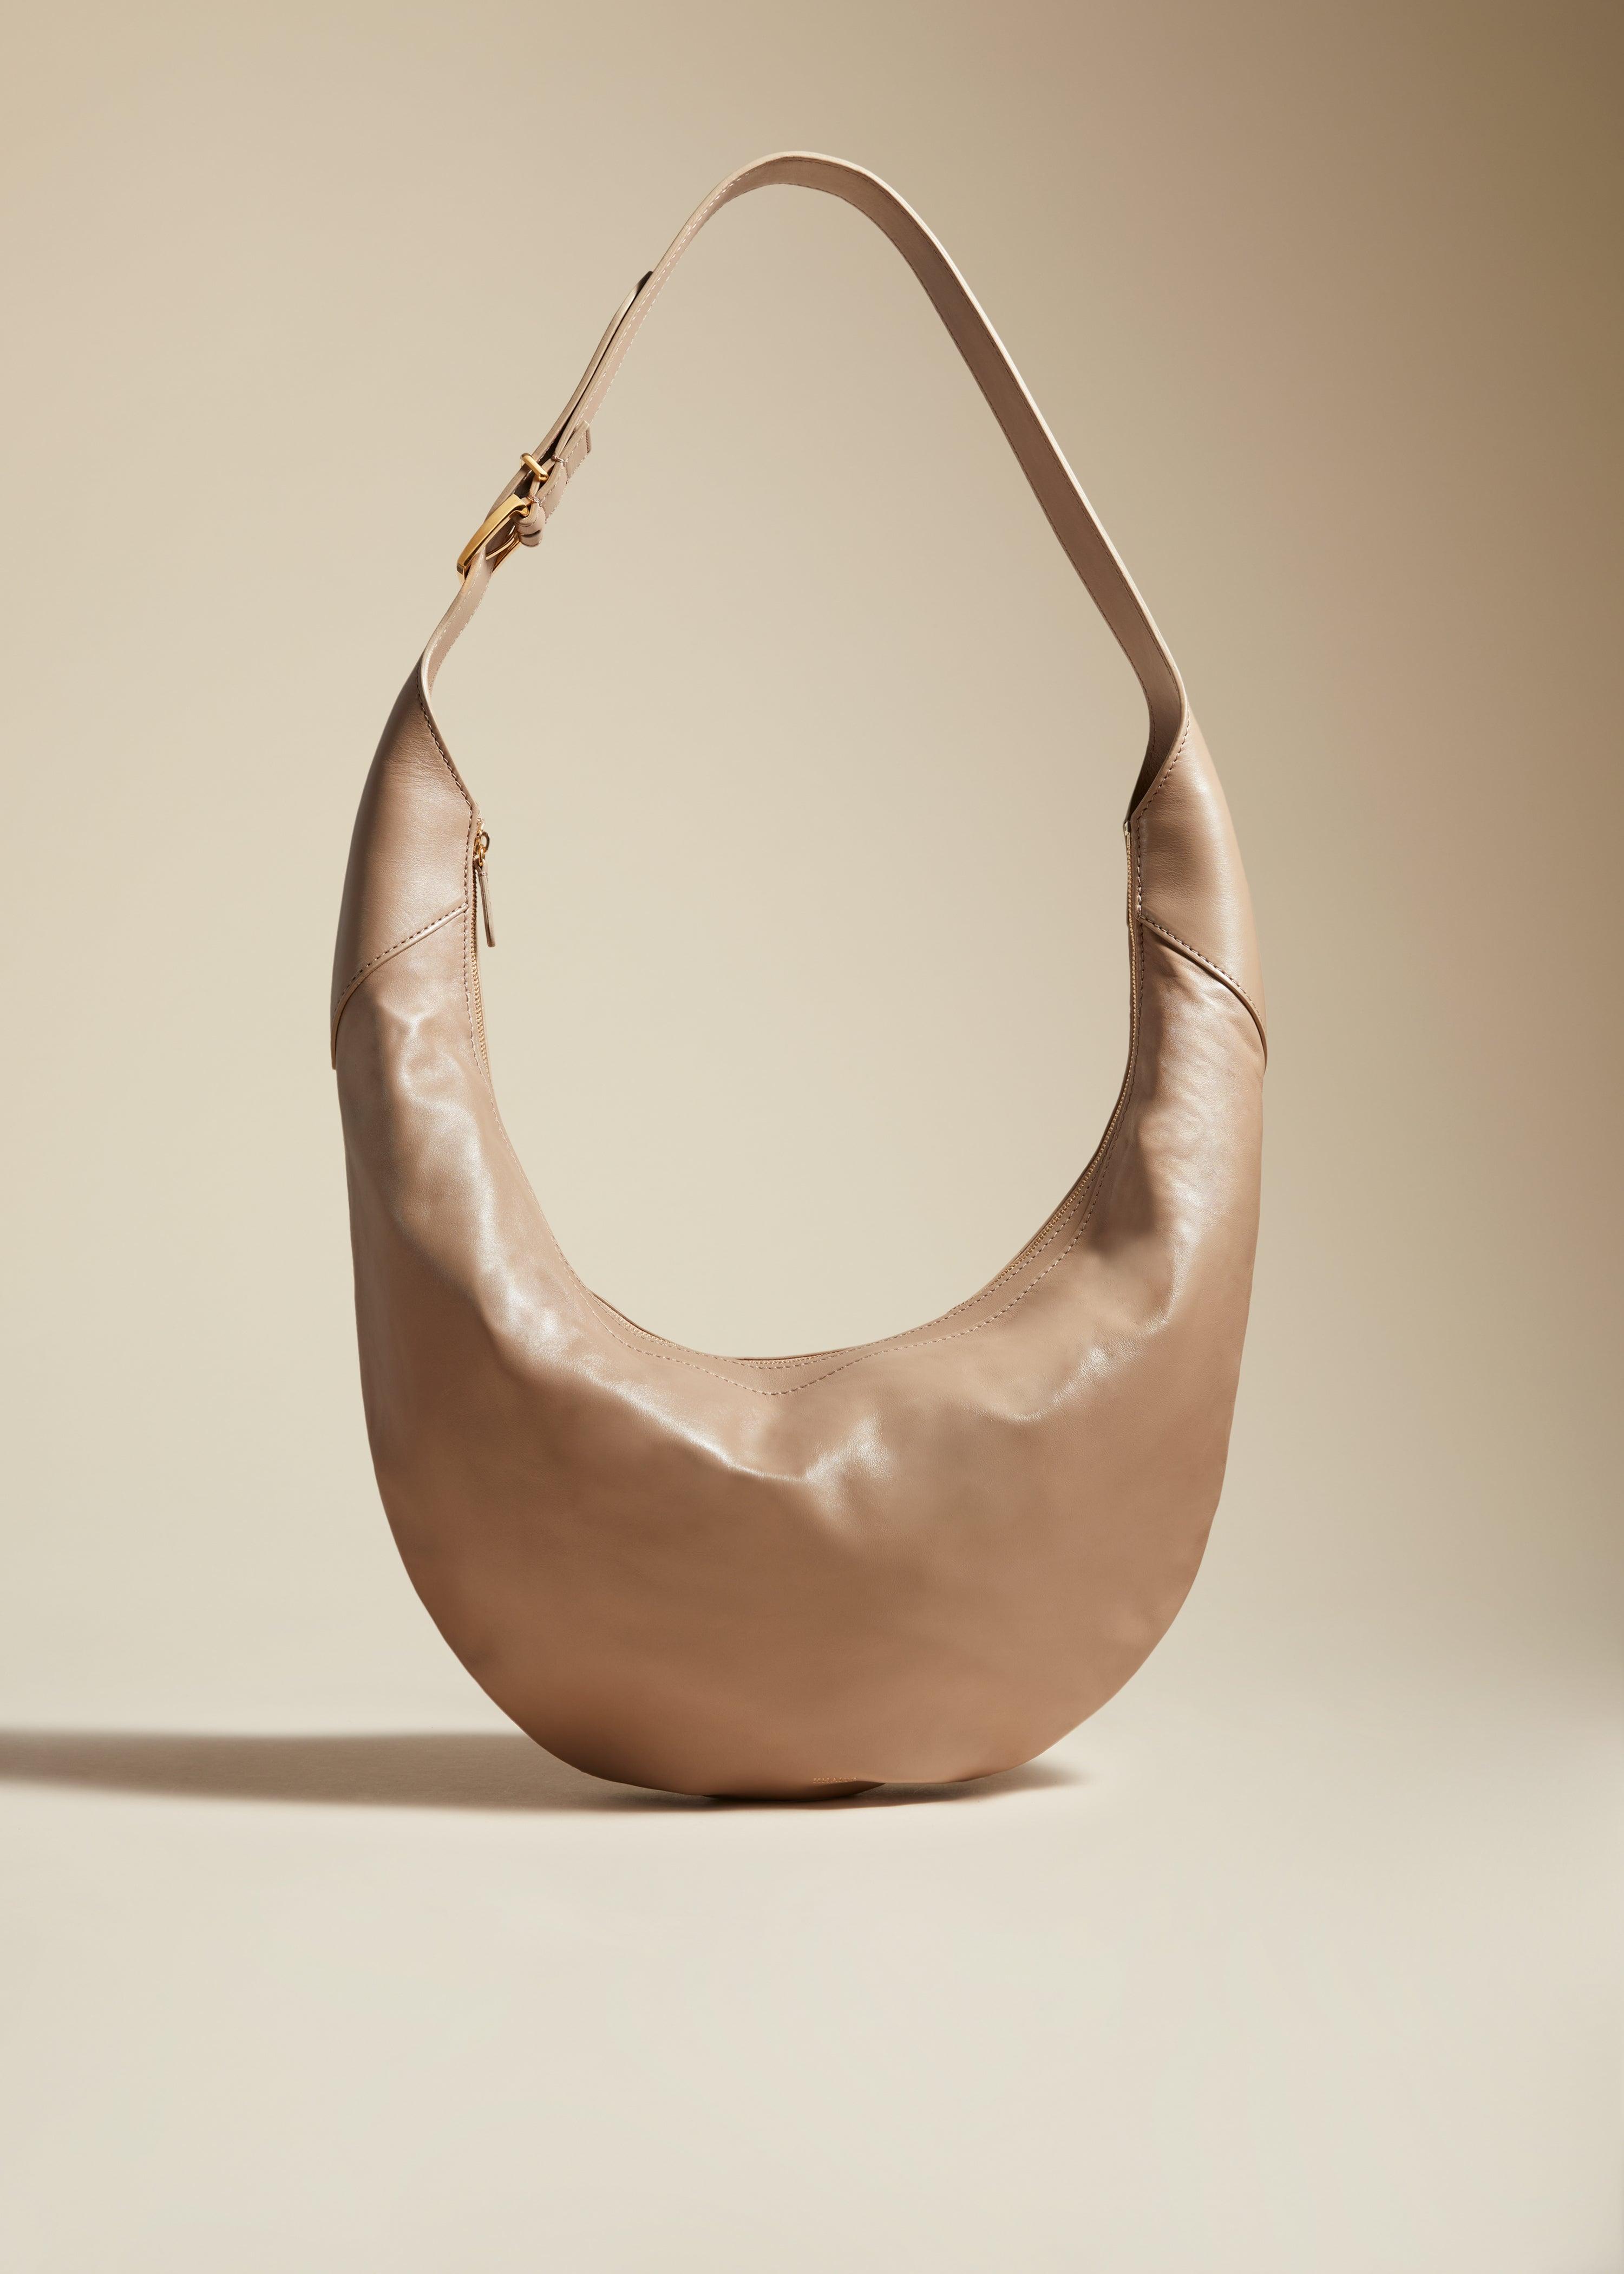 The August Hobo in Taupe Leather - The Iconic Issue